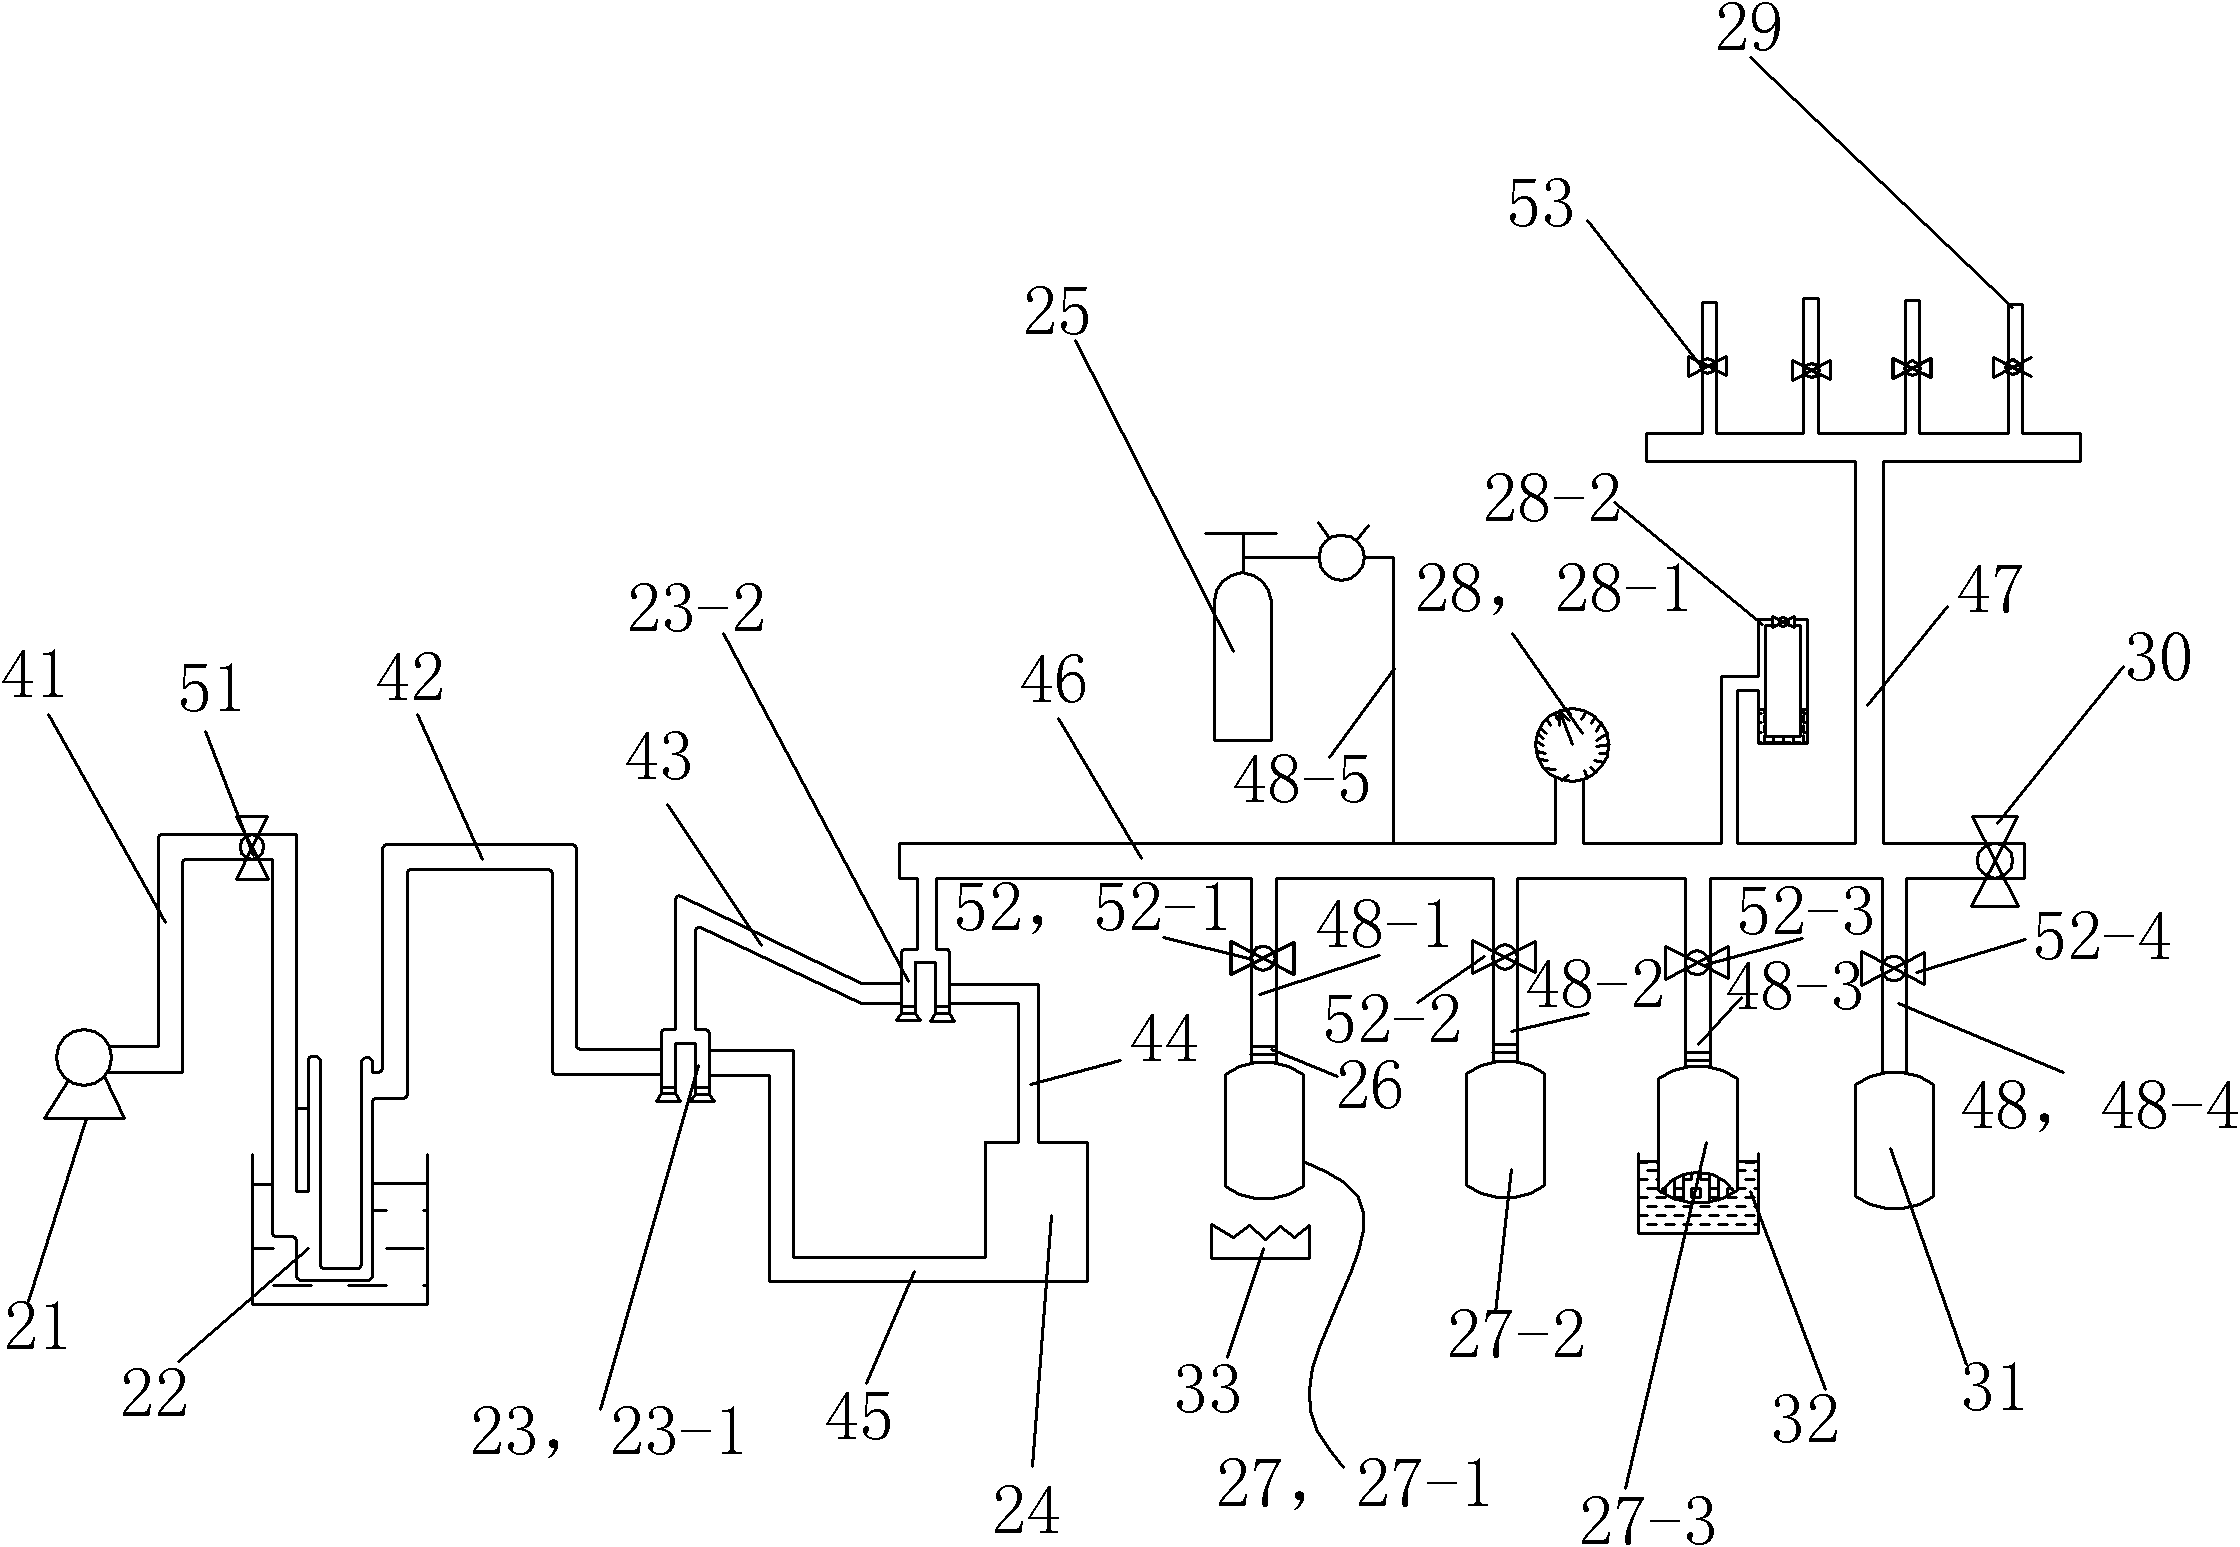 Device for treating waste water with microwave electrodeless excimer lamp and gas distributing system for lamp